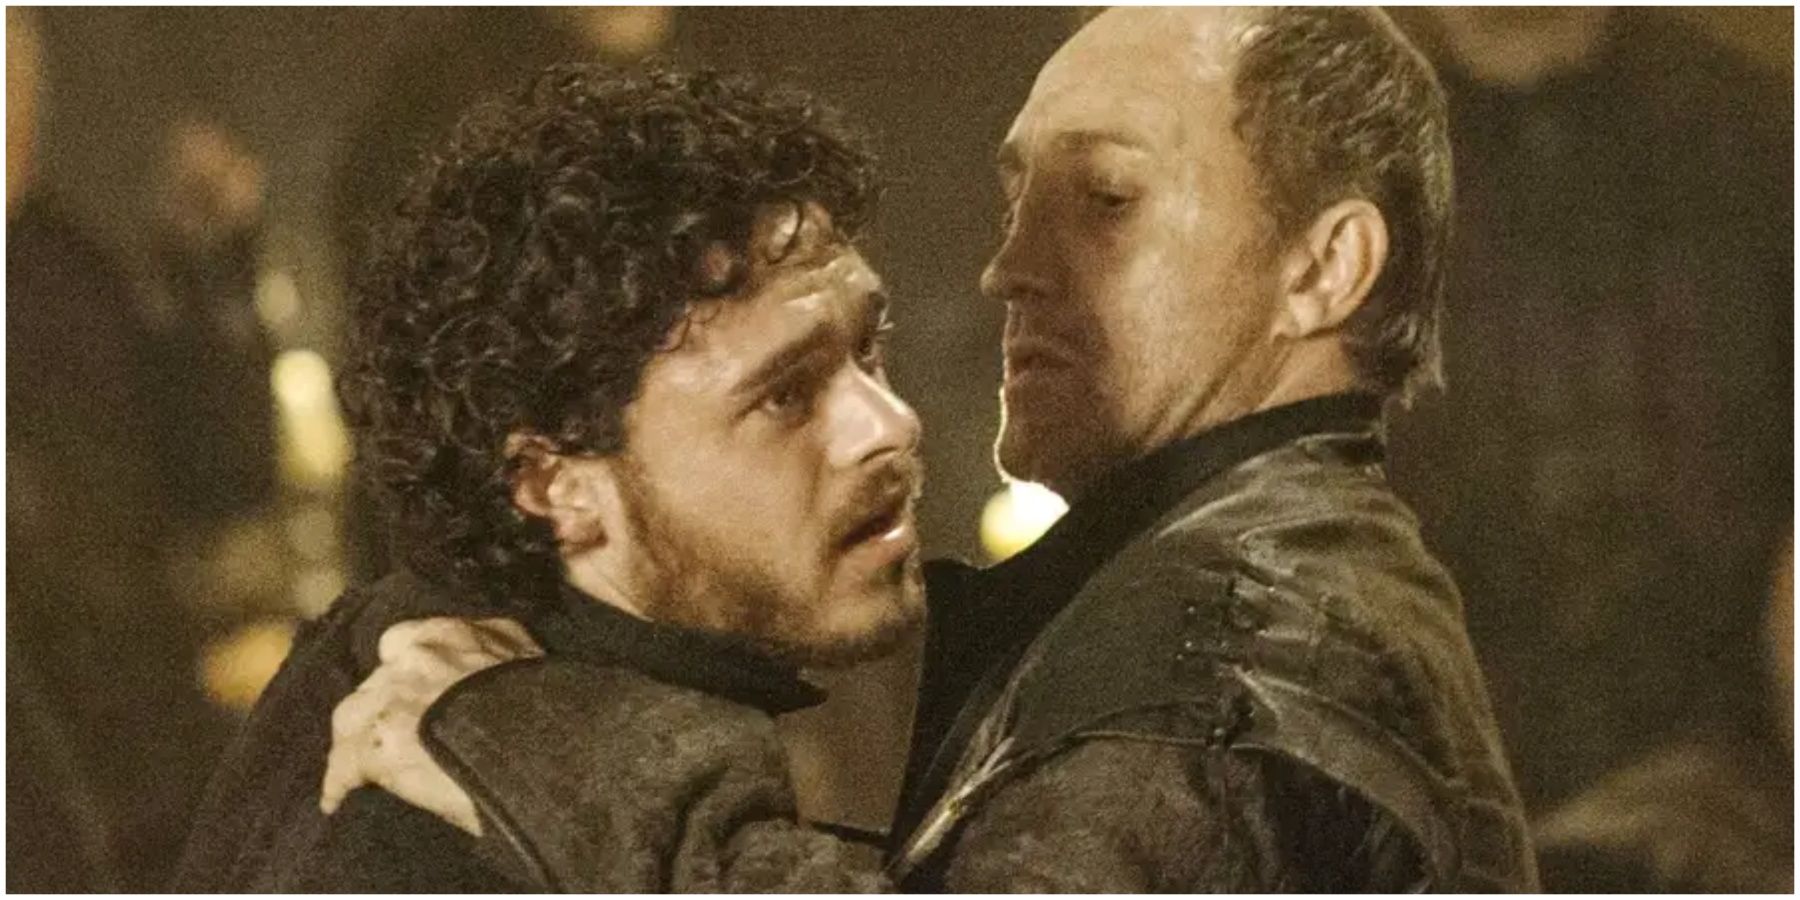 Roose Bolton kills Robb Stark in Game of Thrones.